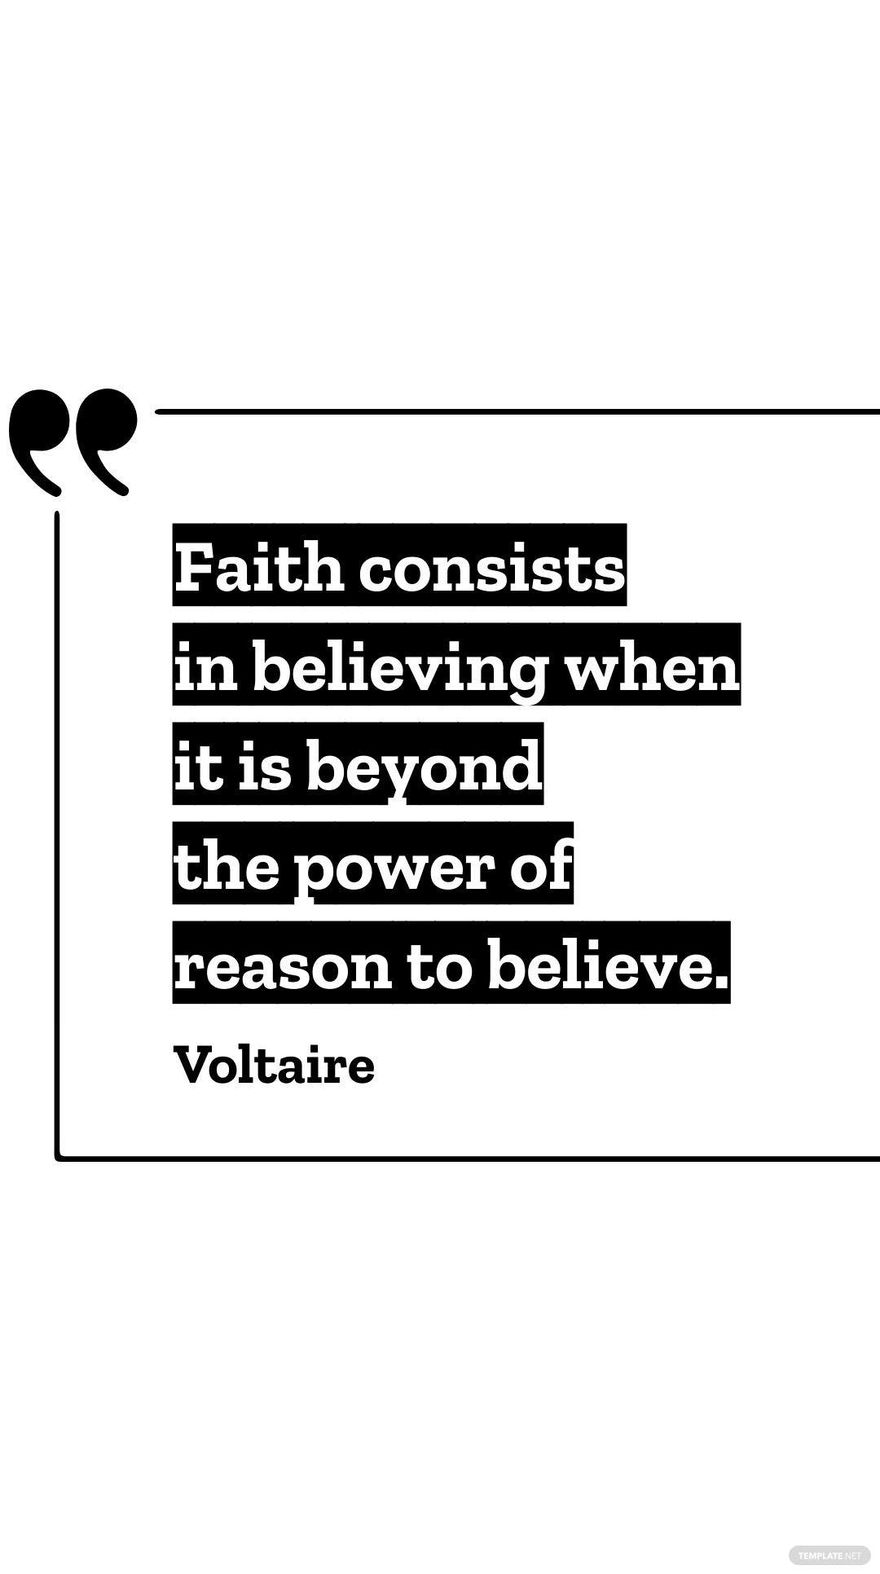 Voltaire - Faith consists in believing when it is beyond the power of reason to believe. in JPG